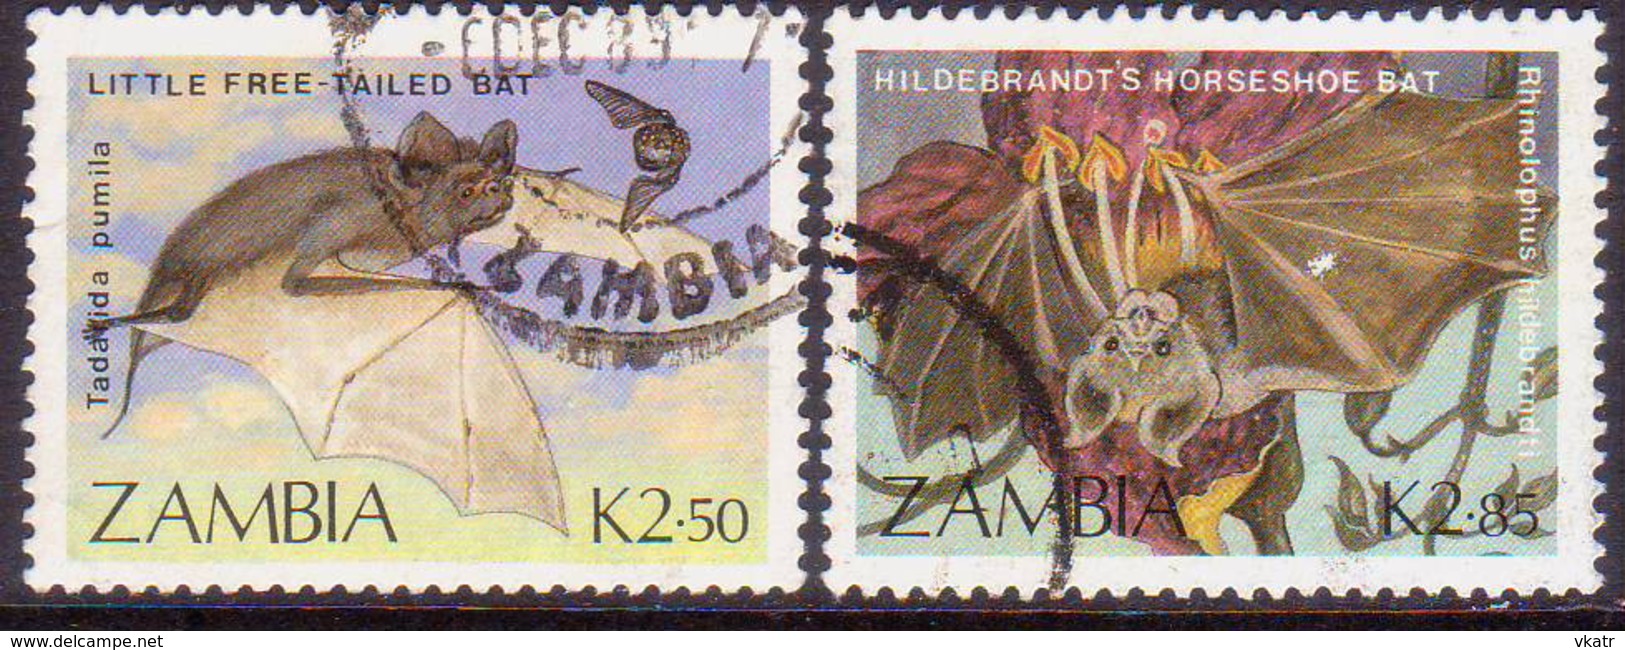 ZAMBIA 1989 SG #572-73 Part Set Used 2 Stamps Of 4 Bats - Zambia (1965-...)